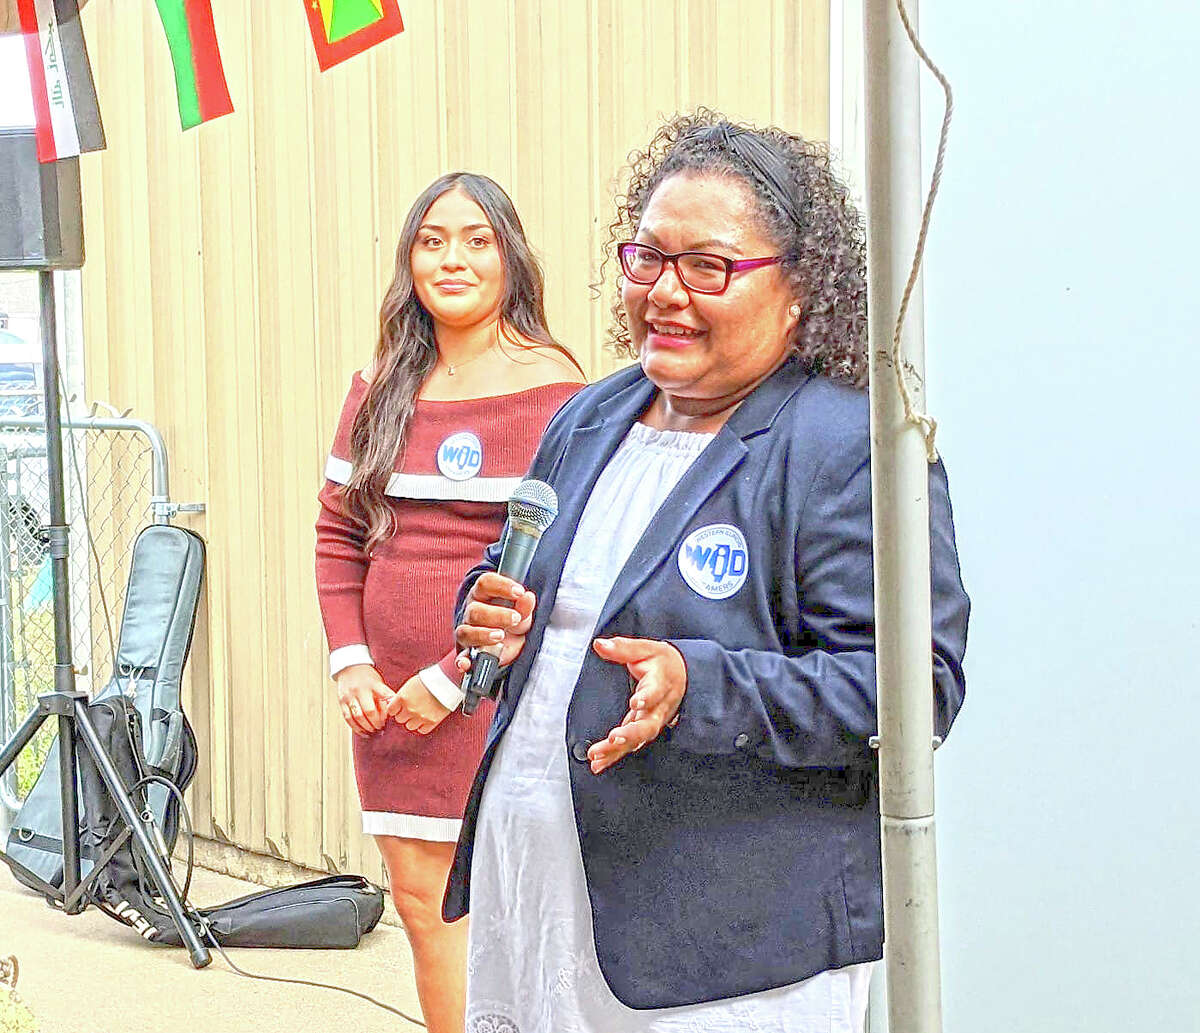 Vianey Torres (right), co-director of the Western Illinois Dreamers immigrant welcome center in Beardstown, speaks during an opening reception for the center as co-director Kiara Perez looks on.